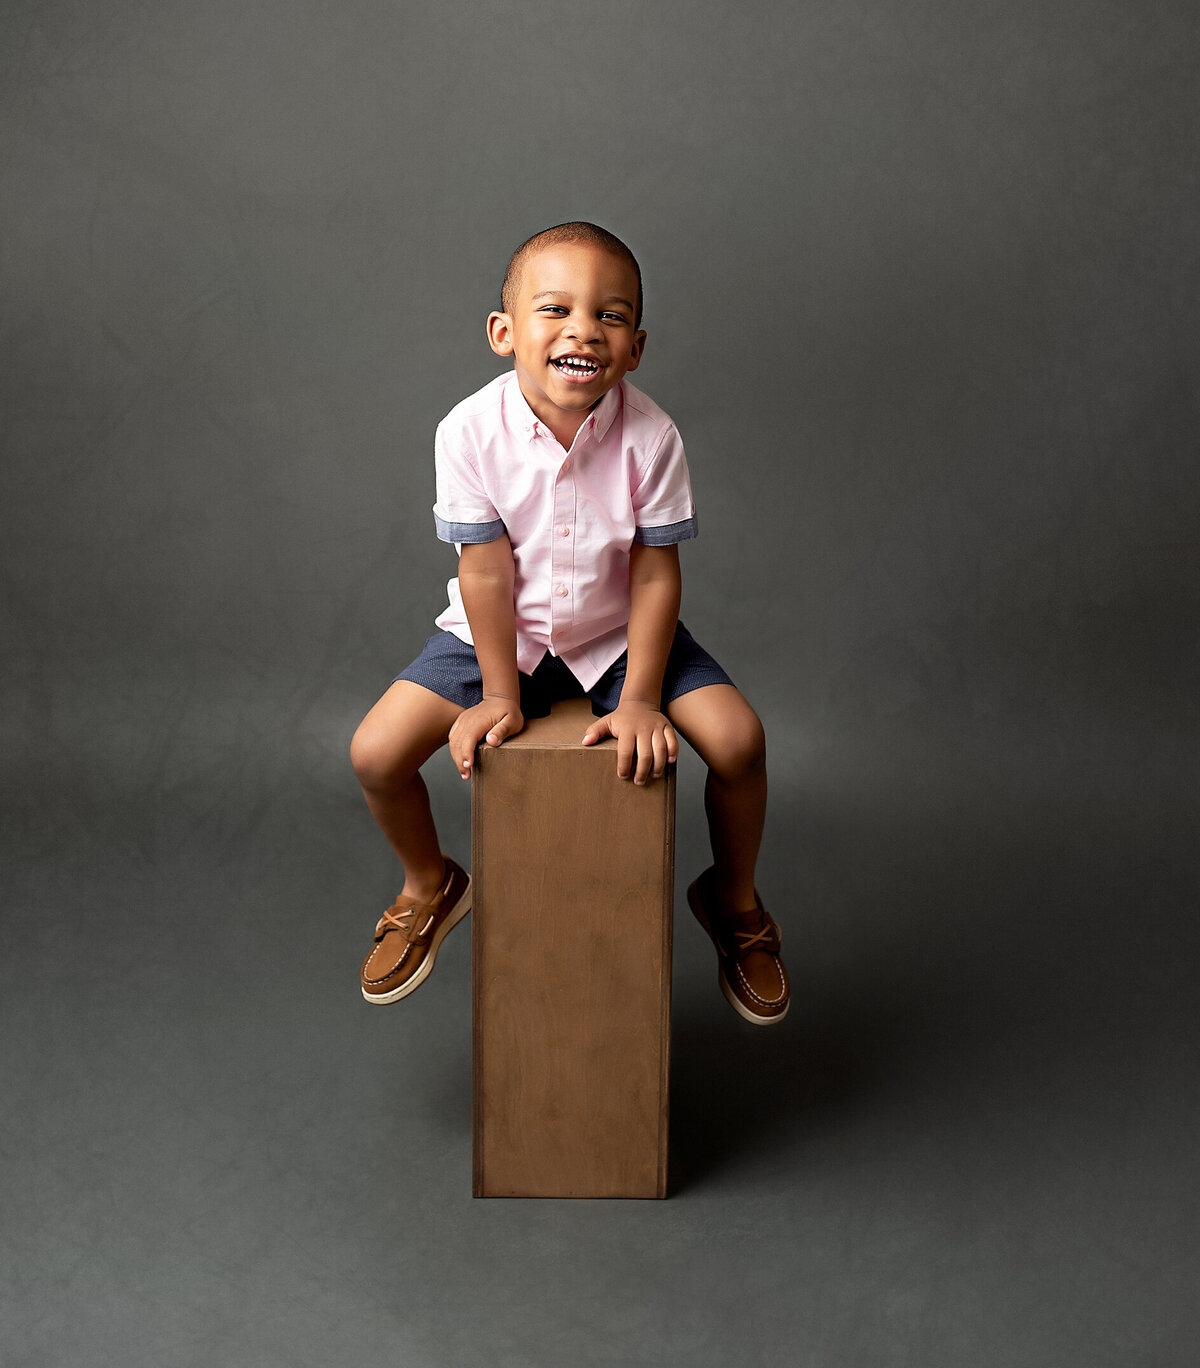 A little boy sitting on  an apple box with hands on the box with one leg on each side.  The boy looking at the camera smiling.